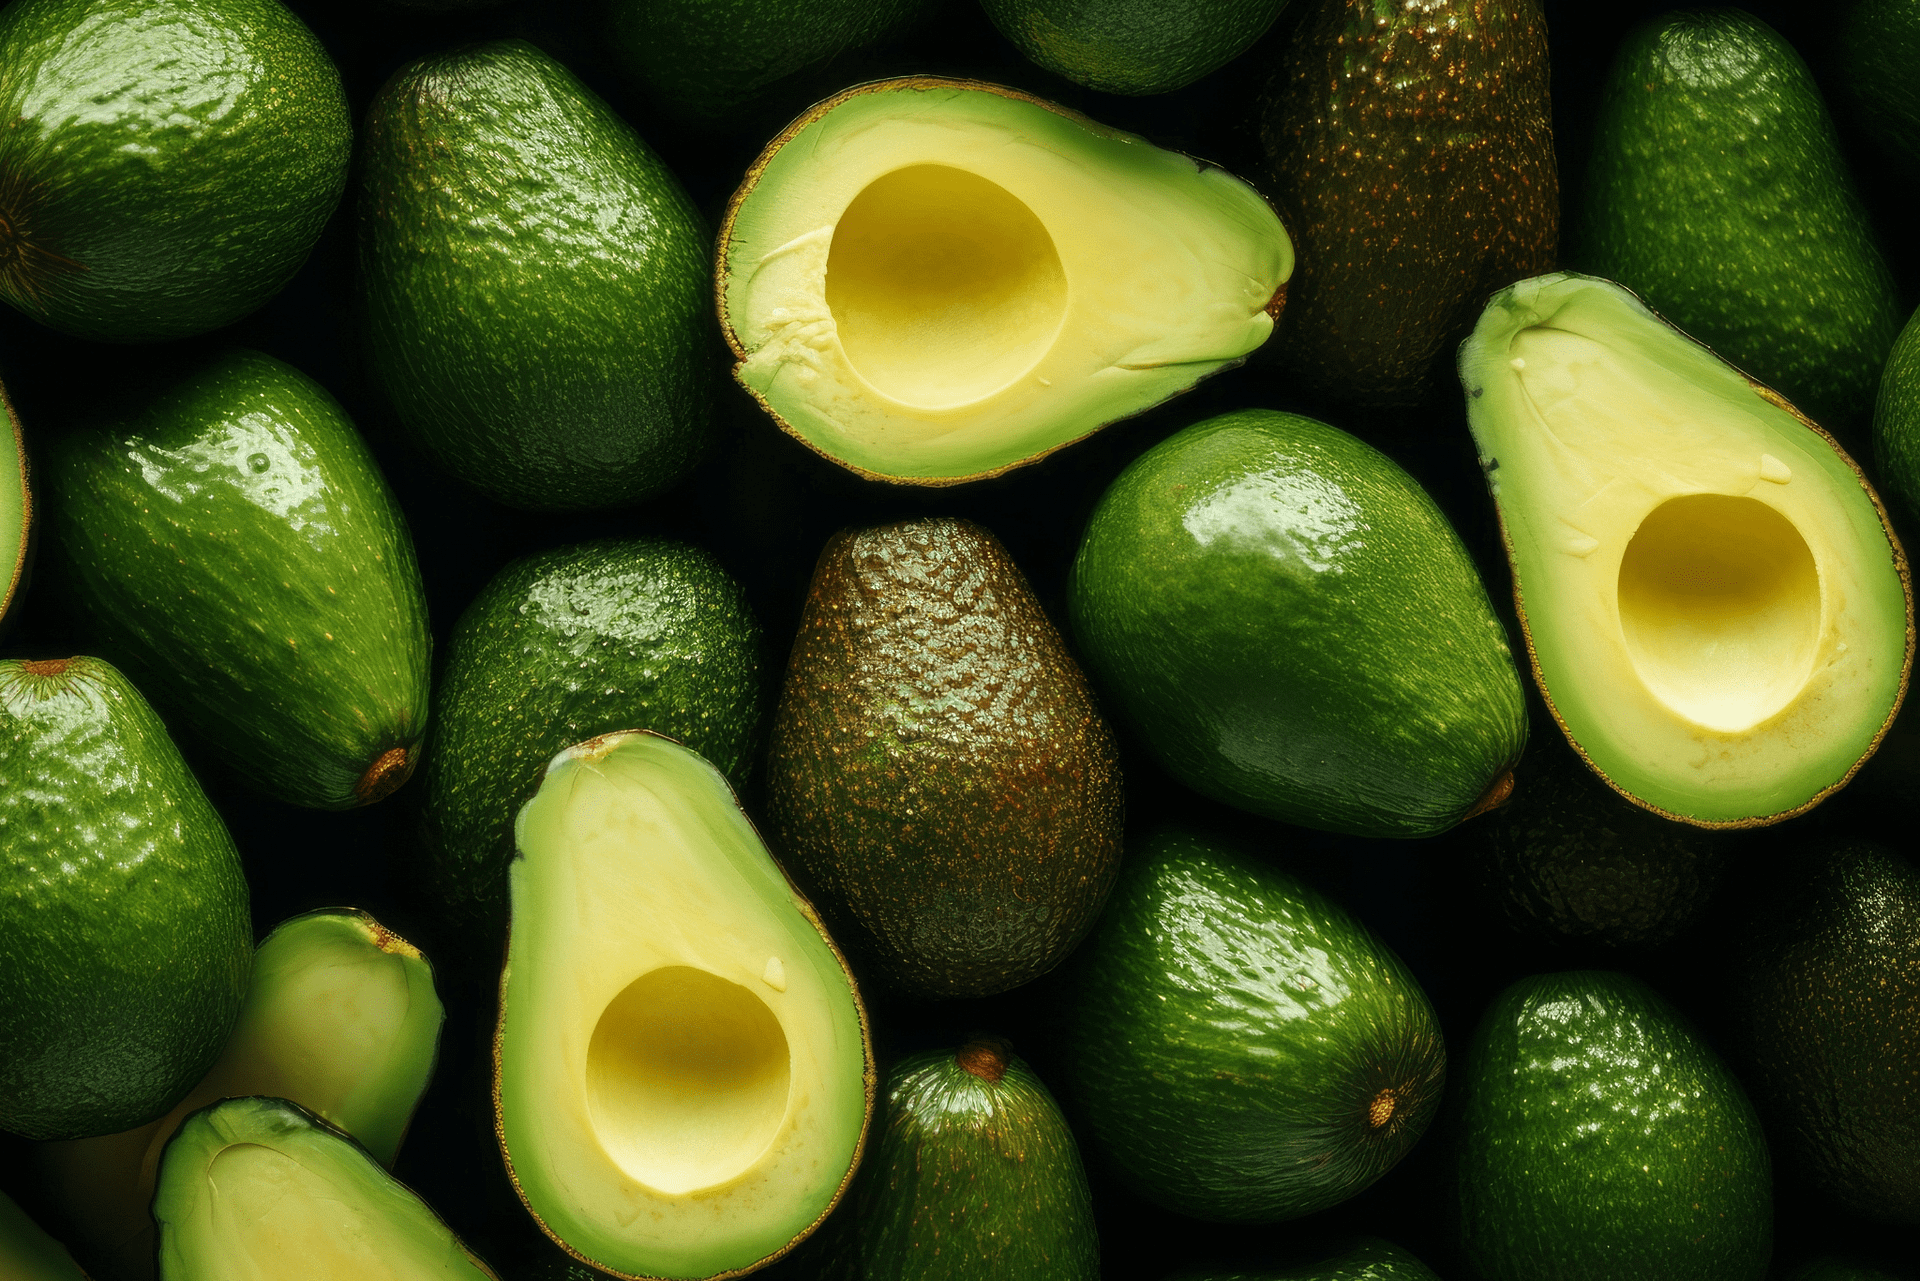 The Palette of Palates: Exploring the Rich Varieties of Avocados